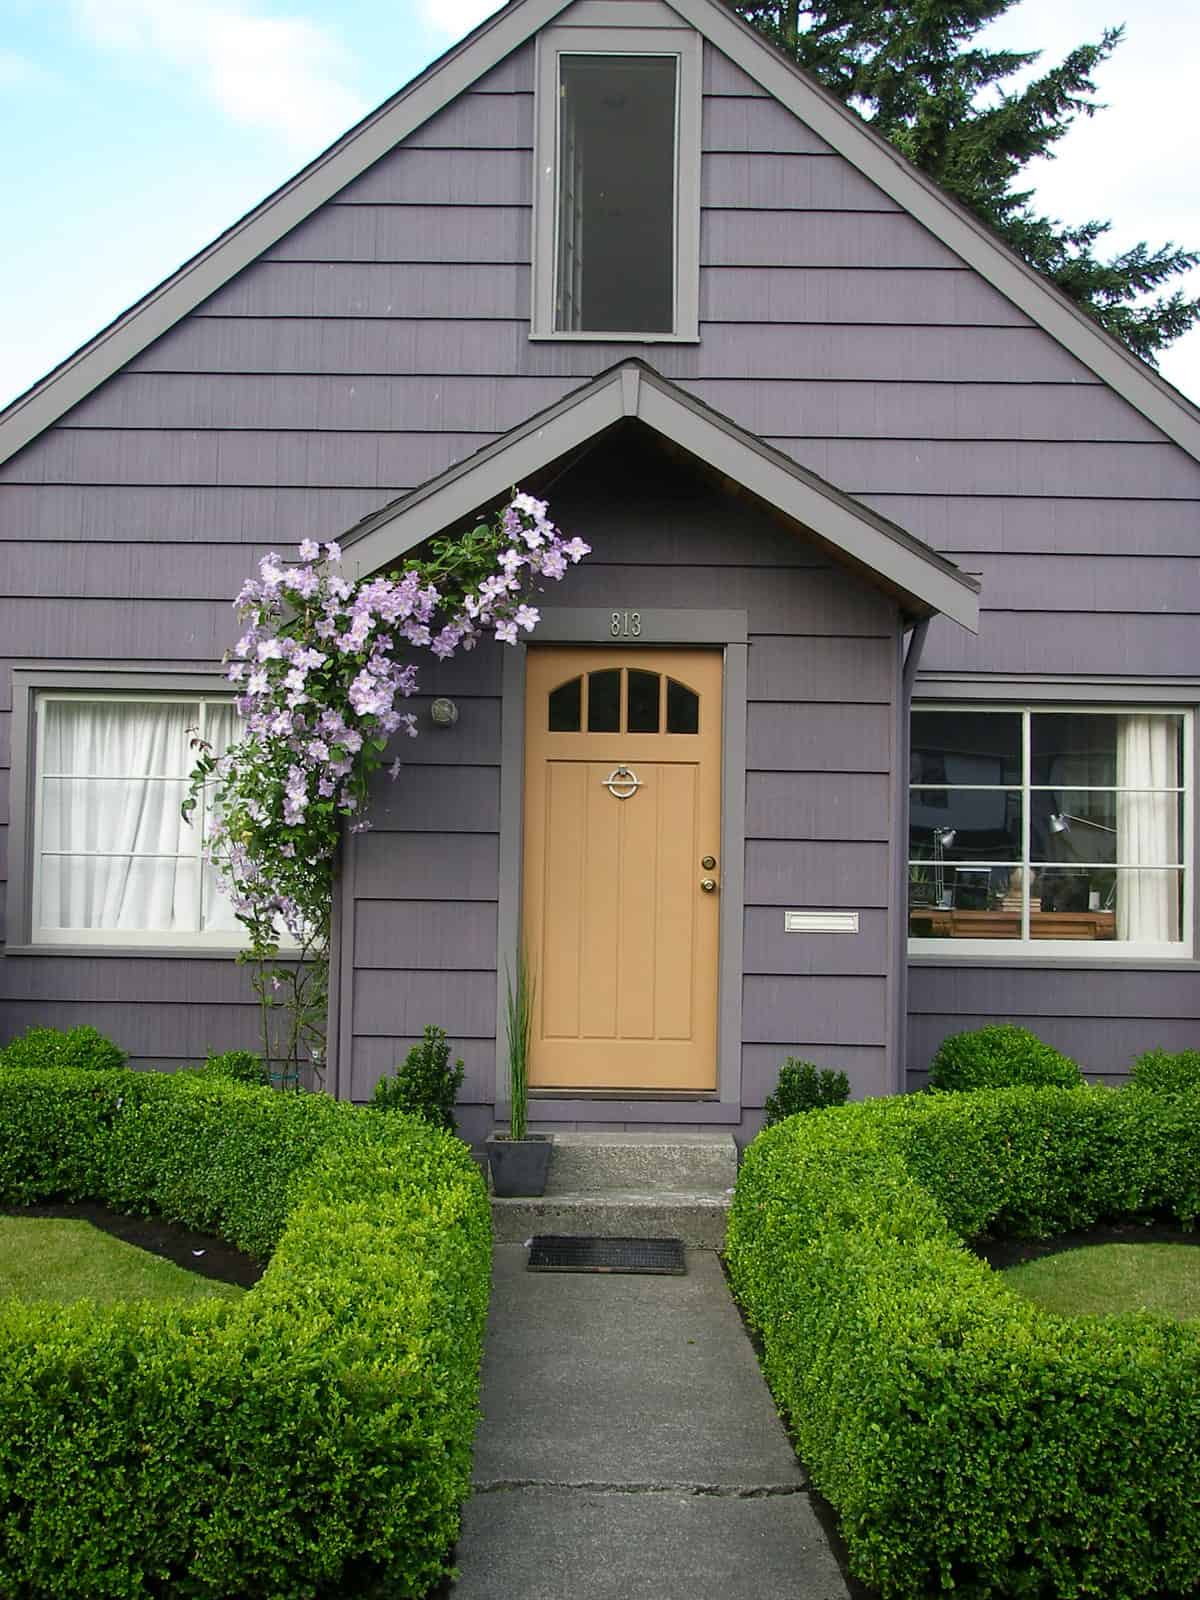 A quaint purple house with a yellow front door, adorned with a flowering vine, stands proudly in the Seattle front garden. Symmetrical shrubbery lines the pathway leading to the entrance. A large central window and a smaller upper window are visible, framed by a manicured lawn on either side.